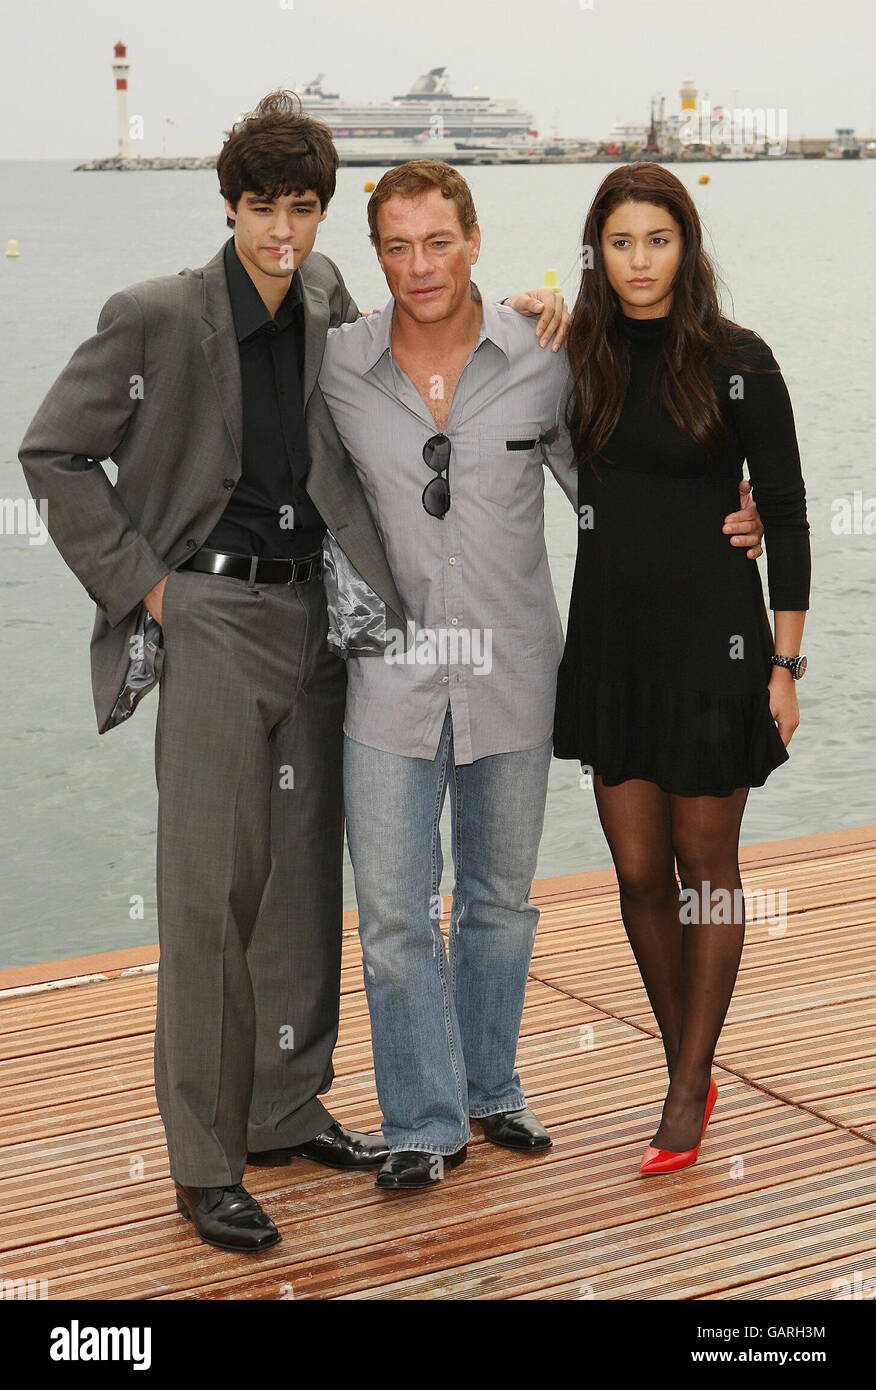 61st Cannes Film Festival - Van Damme Photocall. AP OUT Jean Claude Van  Damme and family is seen at a photocall on the Majestic Pier in Cannes,  France Stock Photo - Alamy